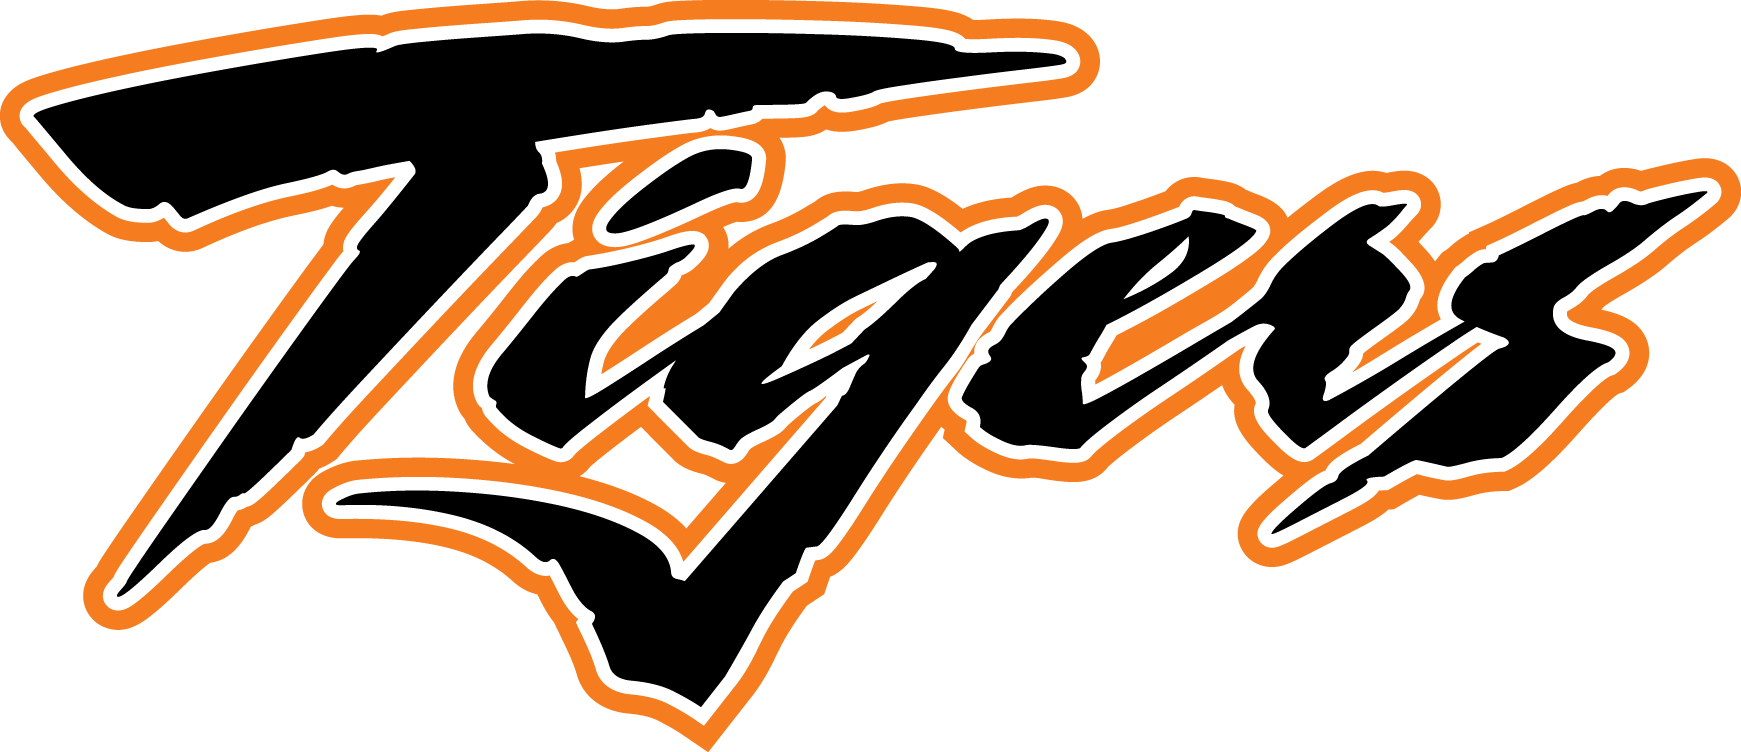 Logo File Of The Colored Version For Princeton Tigers - Tigers Logo (1741x752)